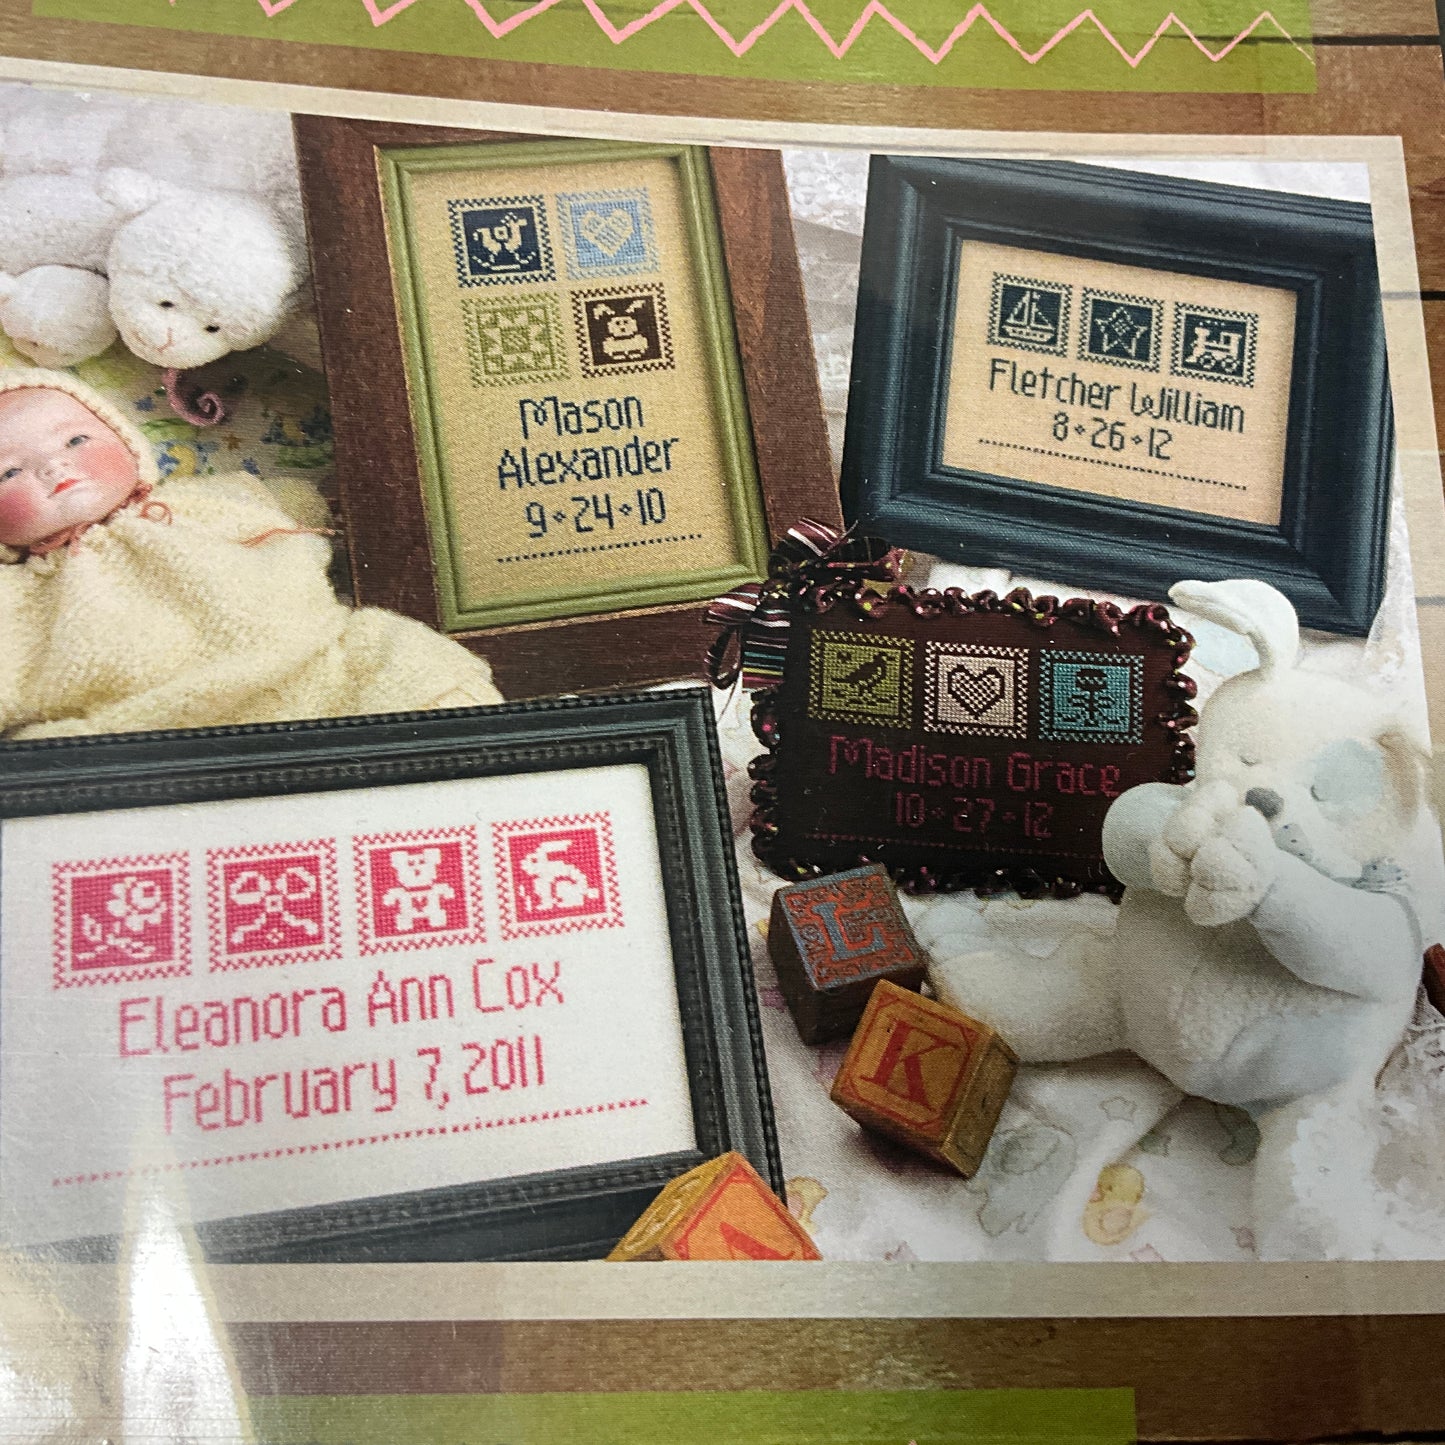 Lizzie Kate choice counted cross stitch charts see pictures and variations*